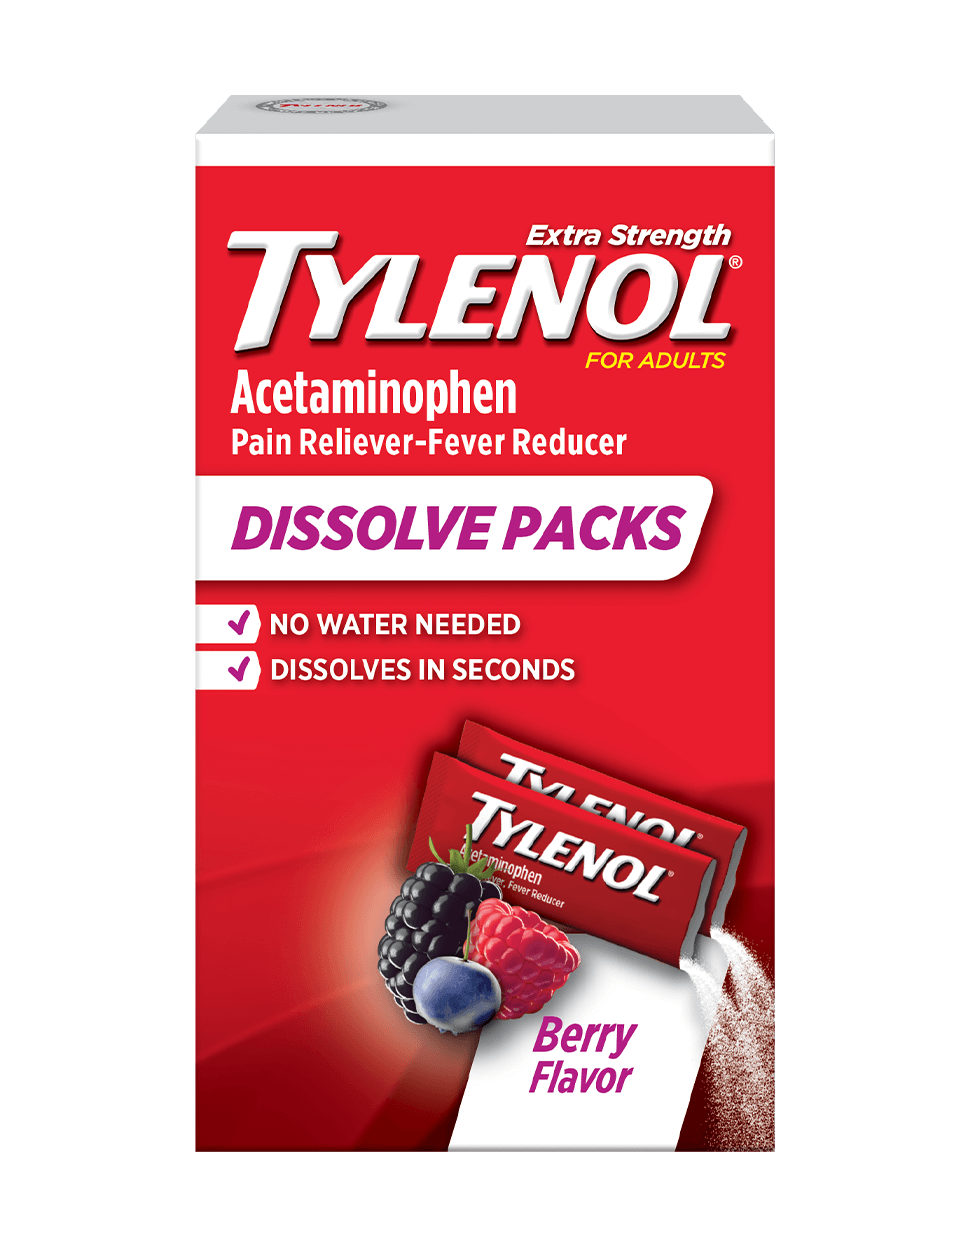 Extra Strength Tylenol® Dissolve Packs pain relief and fever reducer medicine in berry flavor